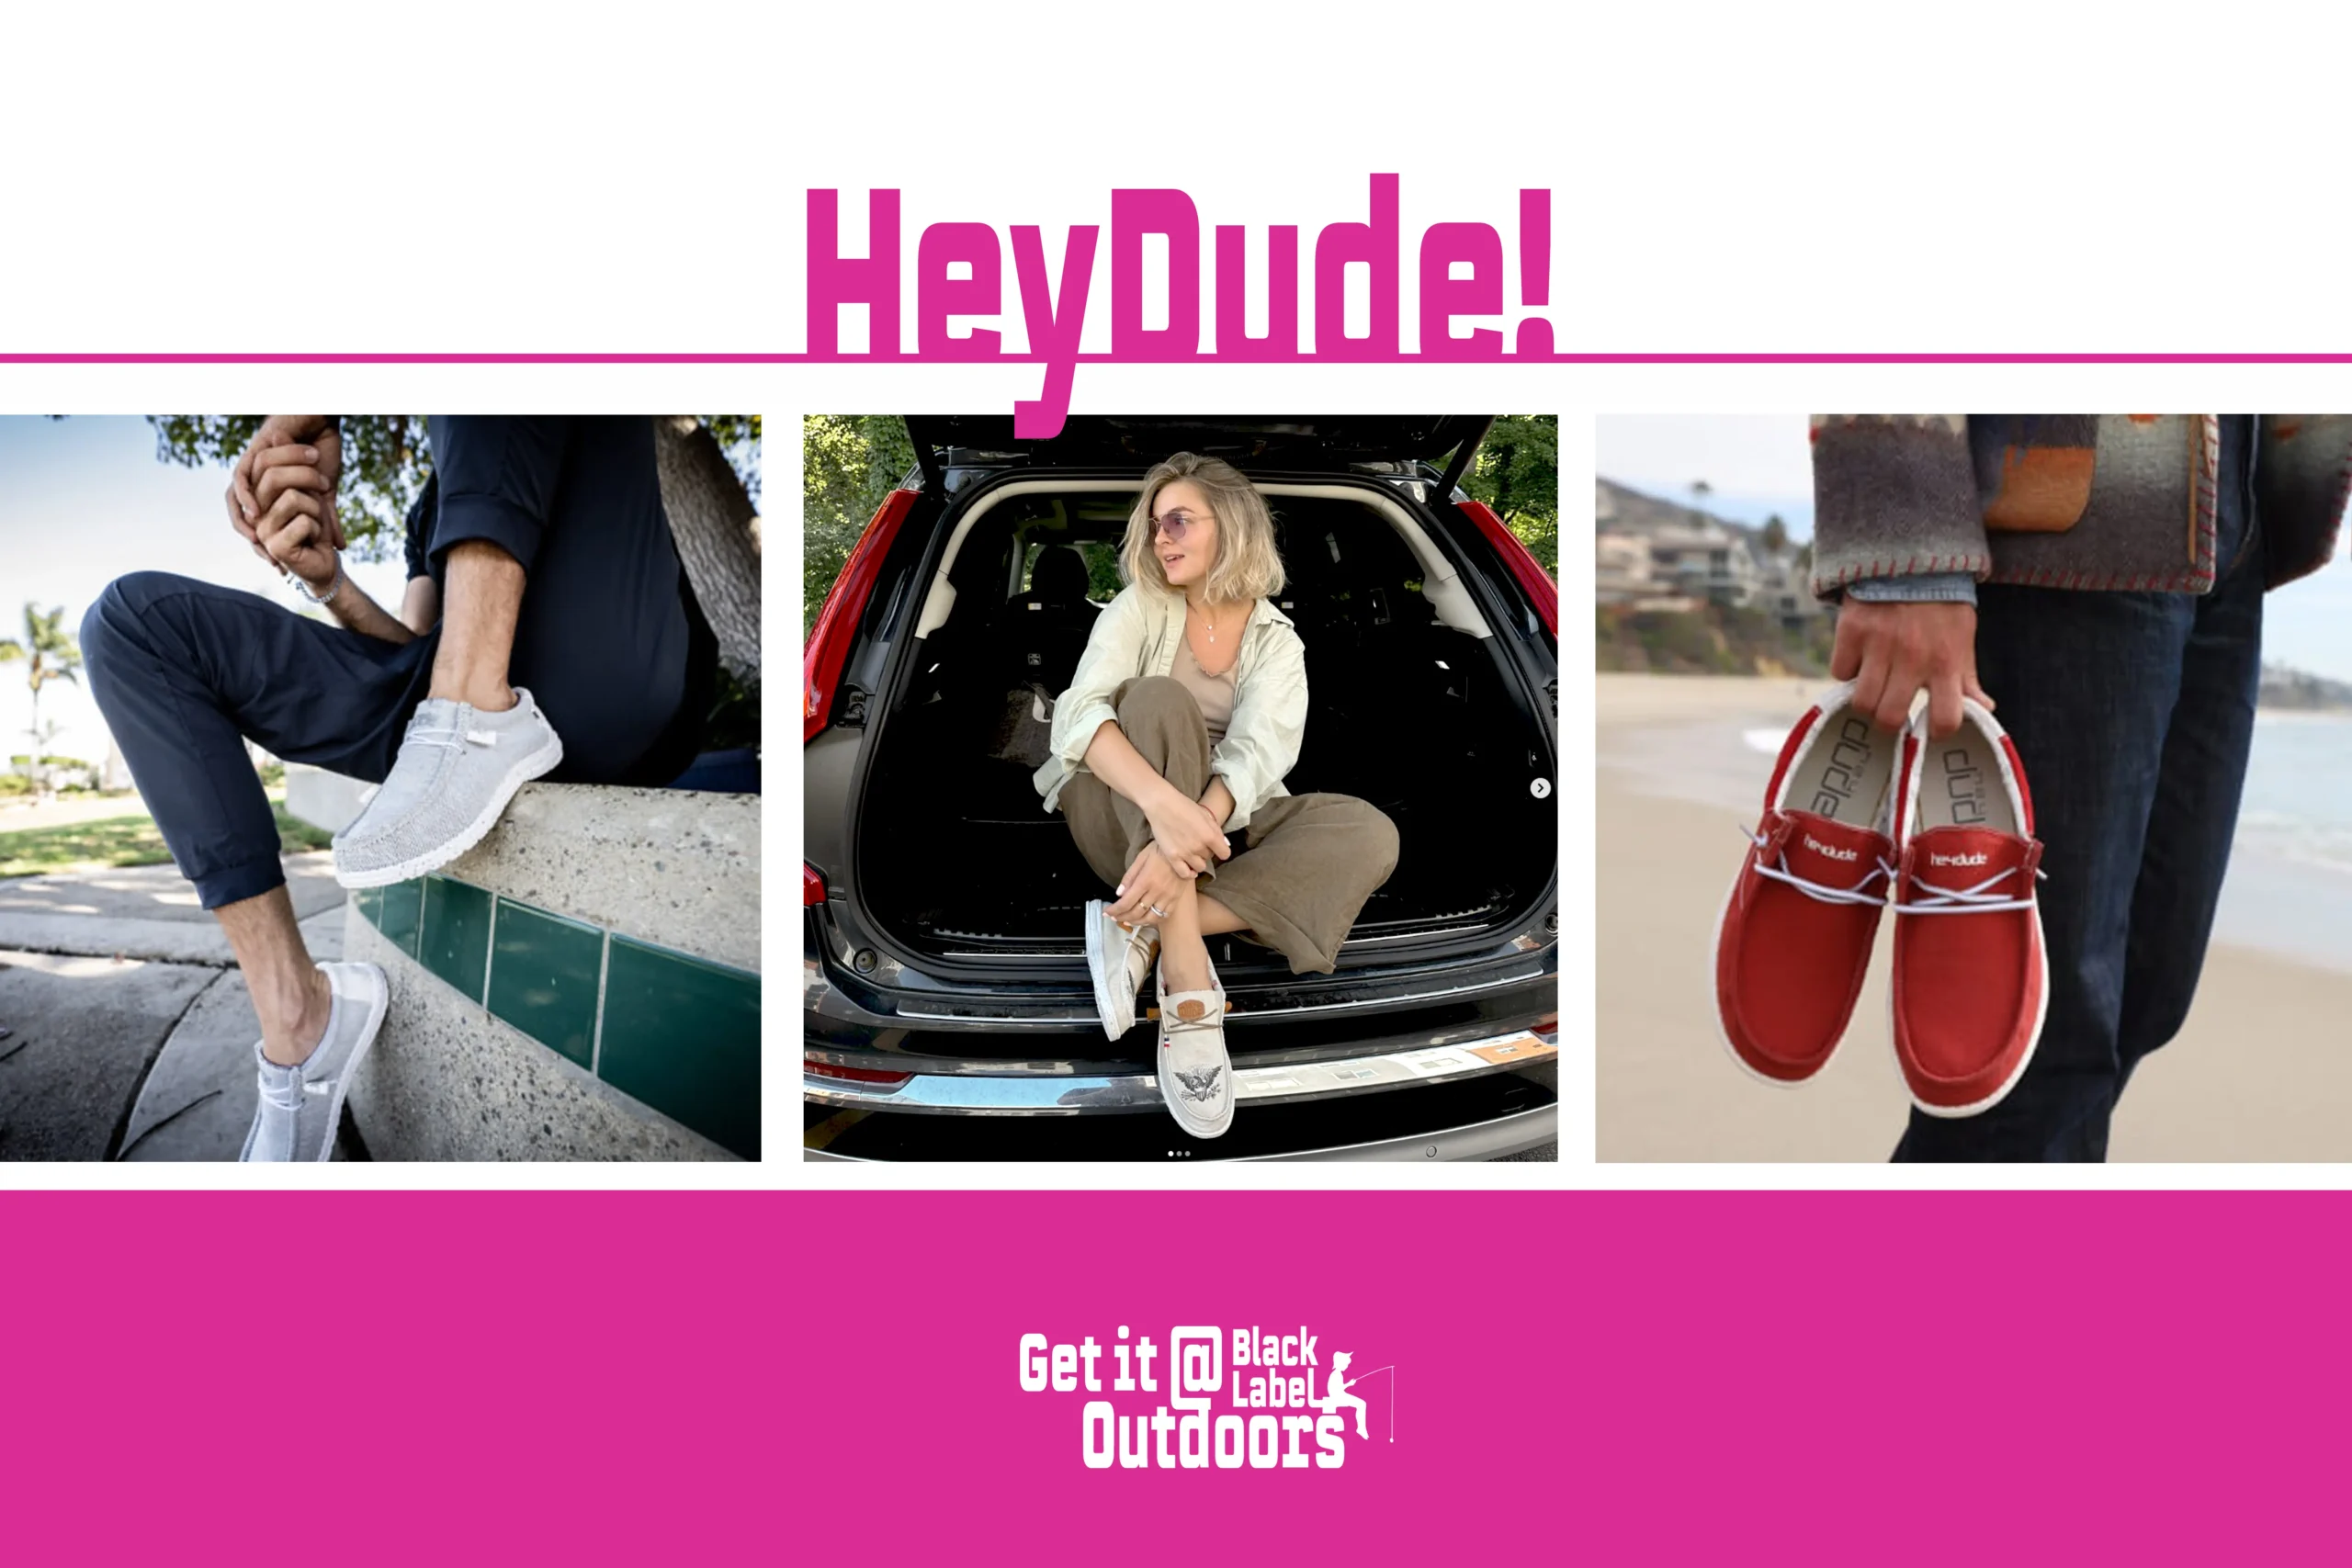 Hey Dude! Shoes